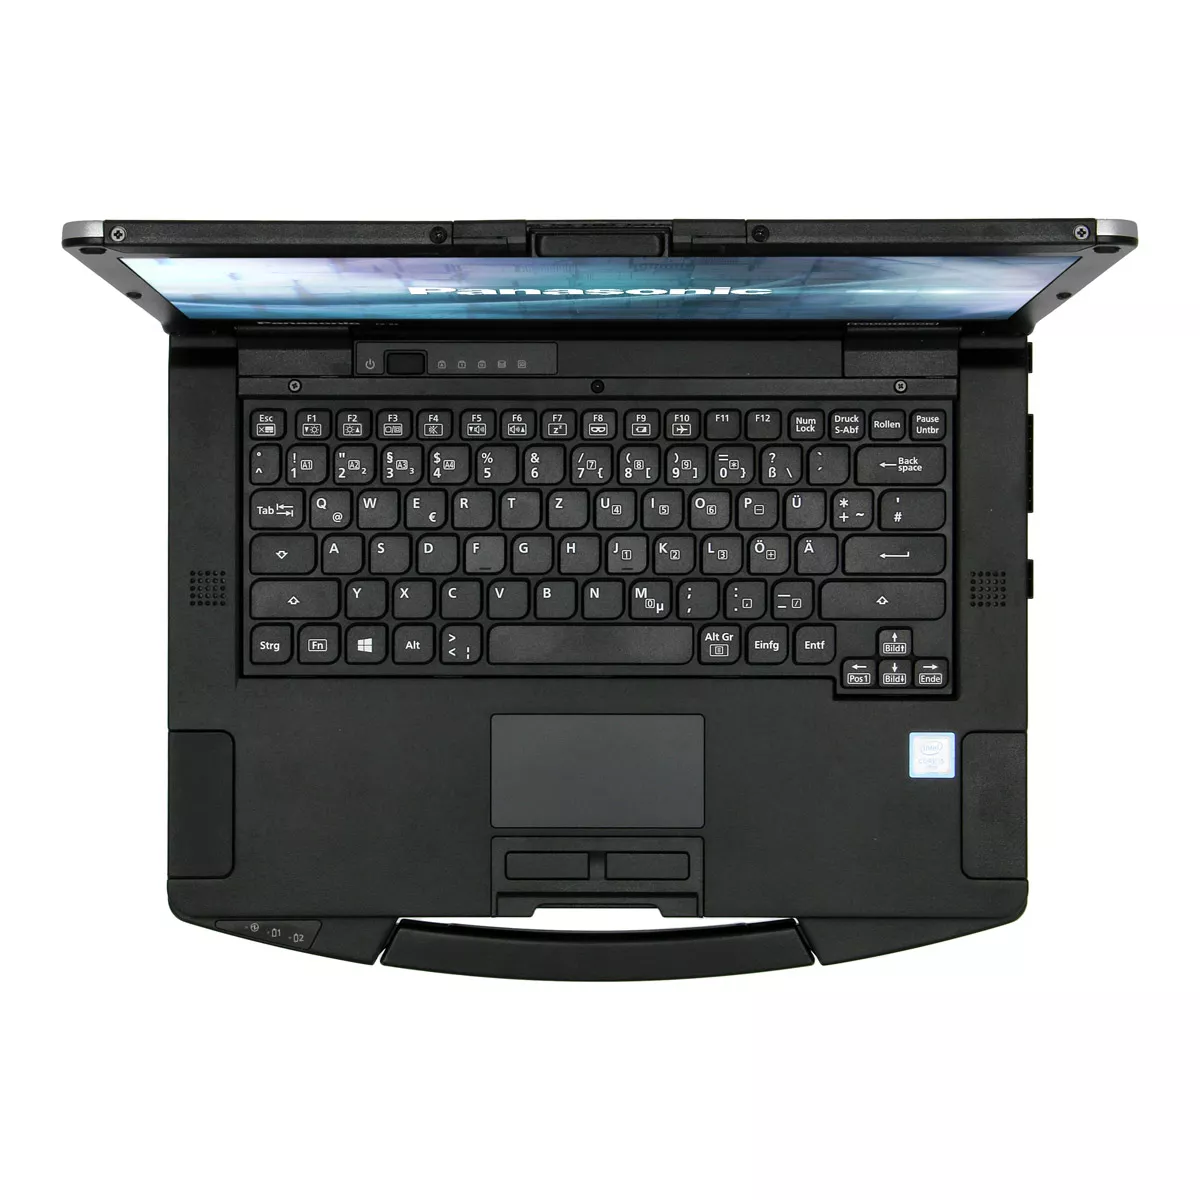 Outdoor Notebook Panasonic Toughbook FZ-55 Core i5 8365U Full-HD 240 GB M.2 SSD Webcam Touch US-Layout A+